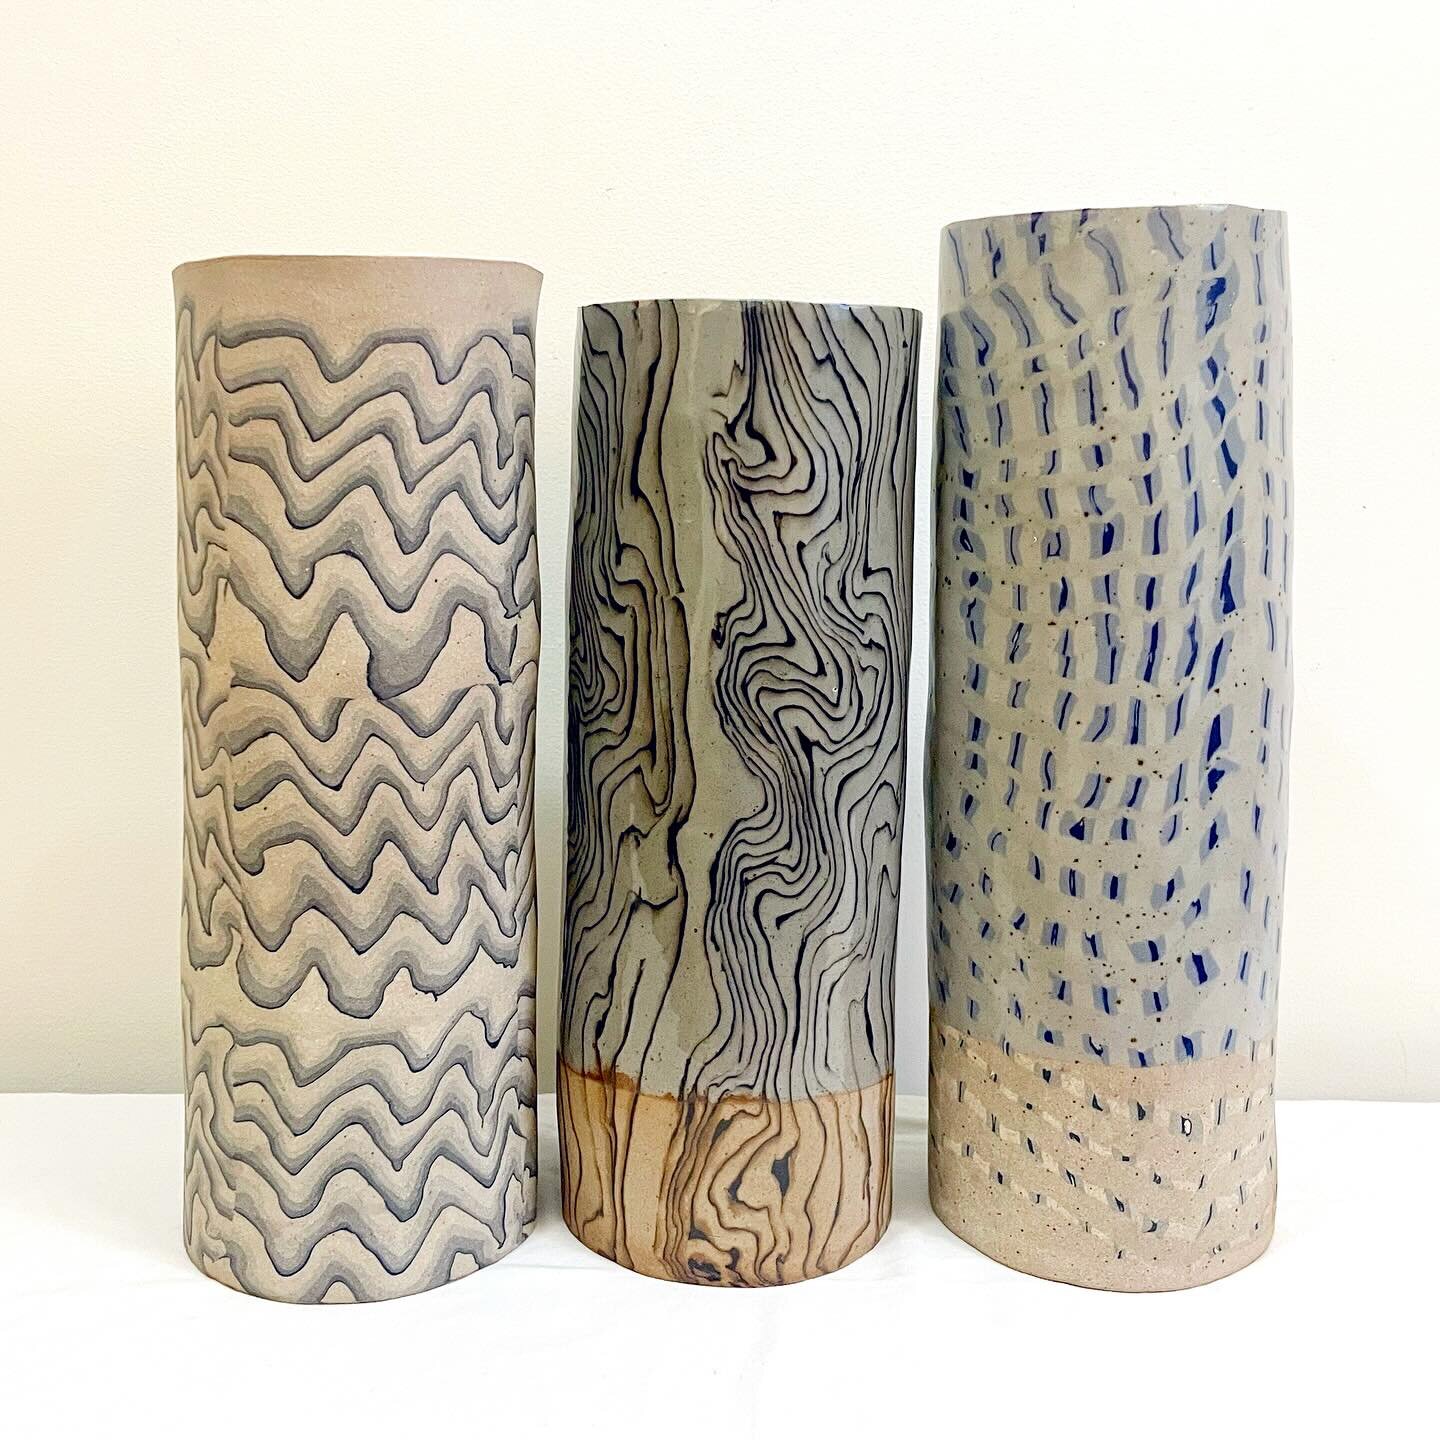 3 Large Cylinders 🏛️

These are about 15in tall with all the way through patterns in the clay body. It took me a couple years of exploration to execute Nerikomi work on this scale. I love the bigger work because the pattern has room to evolve over t